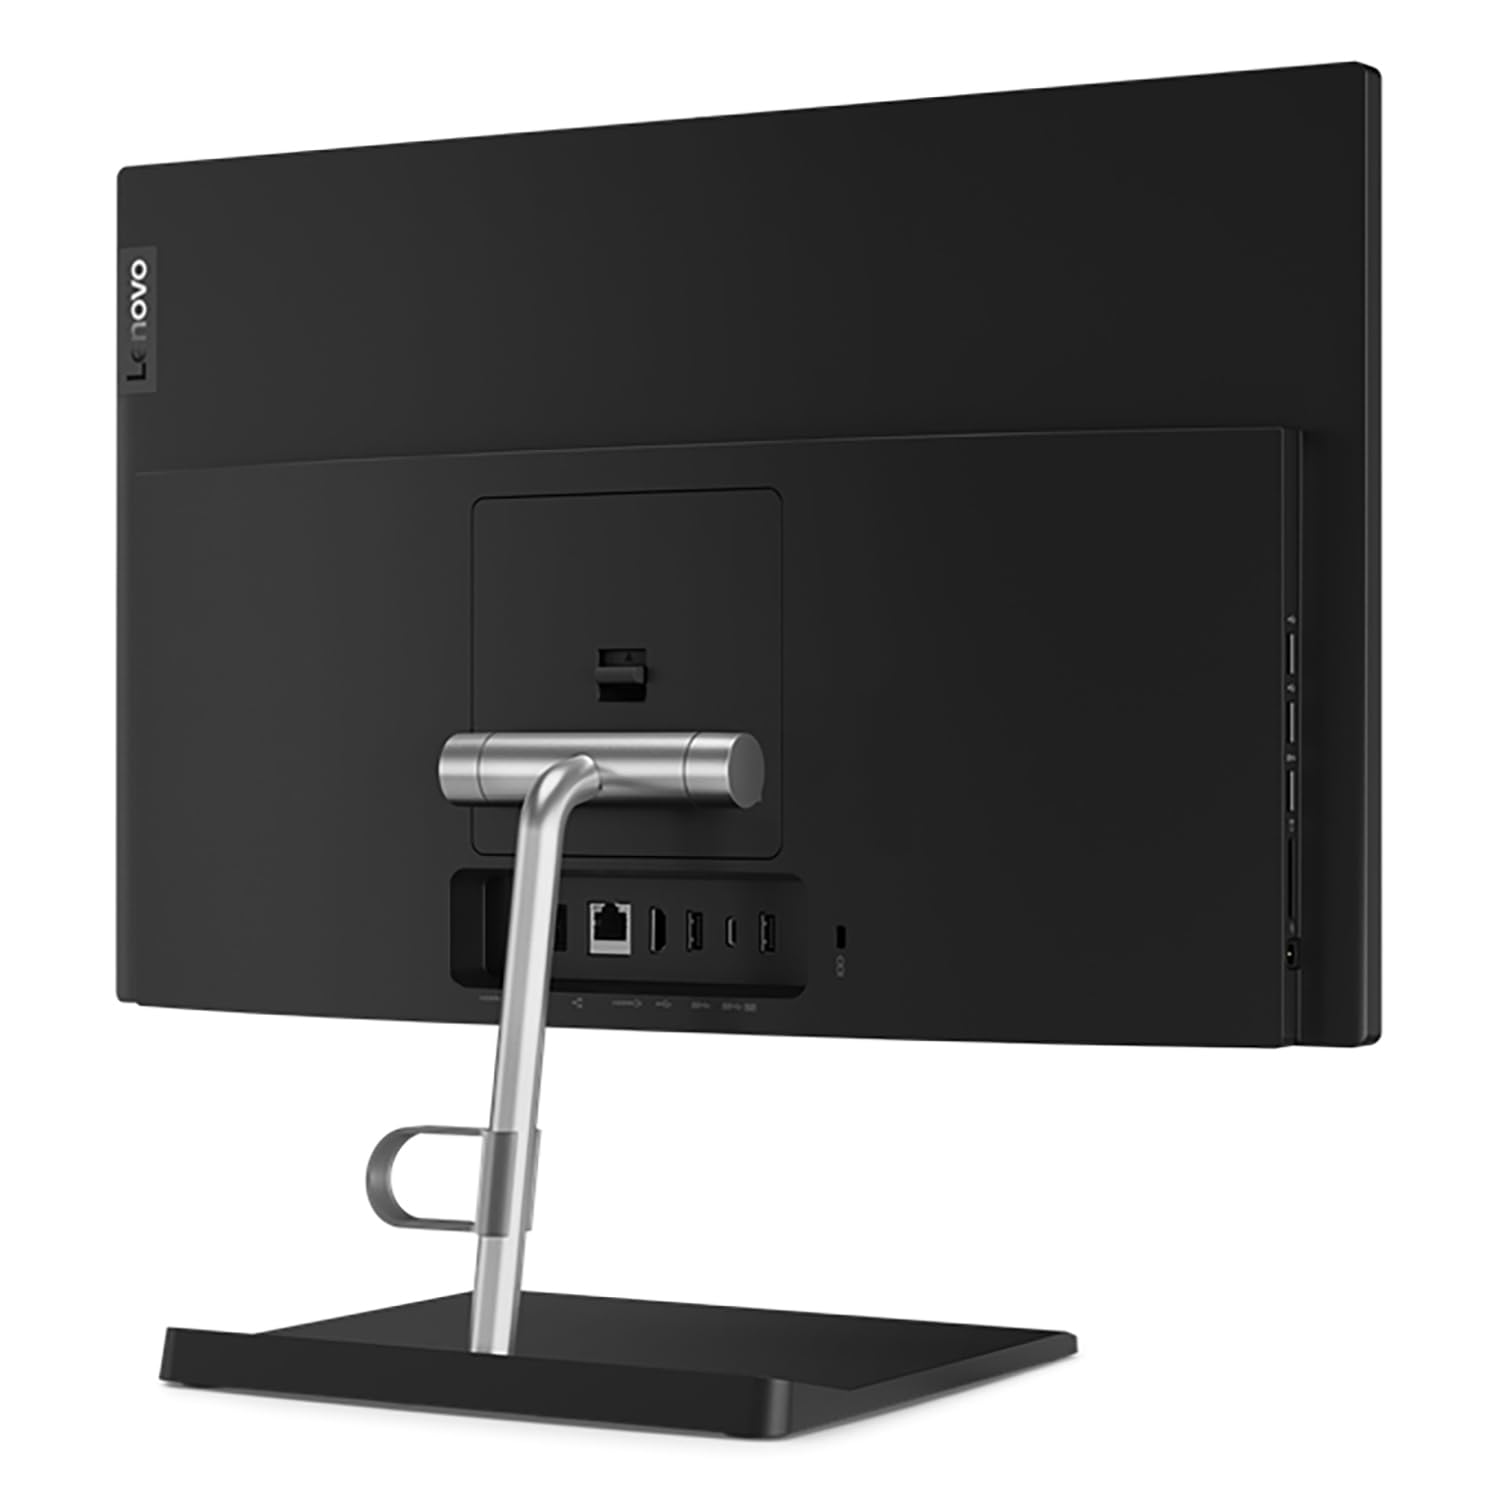 Lenovo V50a 24 AIO 23.8" FHD Business All-in-One Desktop Computer, Intel Core i3-10100T (Beat i5-8300H), 64GB DDR4 RAM, 2TB PCIe SSD, DVDRW, WiFi, Bluetooth 5.0, Keyboard and Mouse, Windows 11 Pro